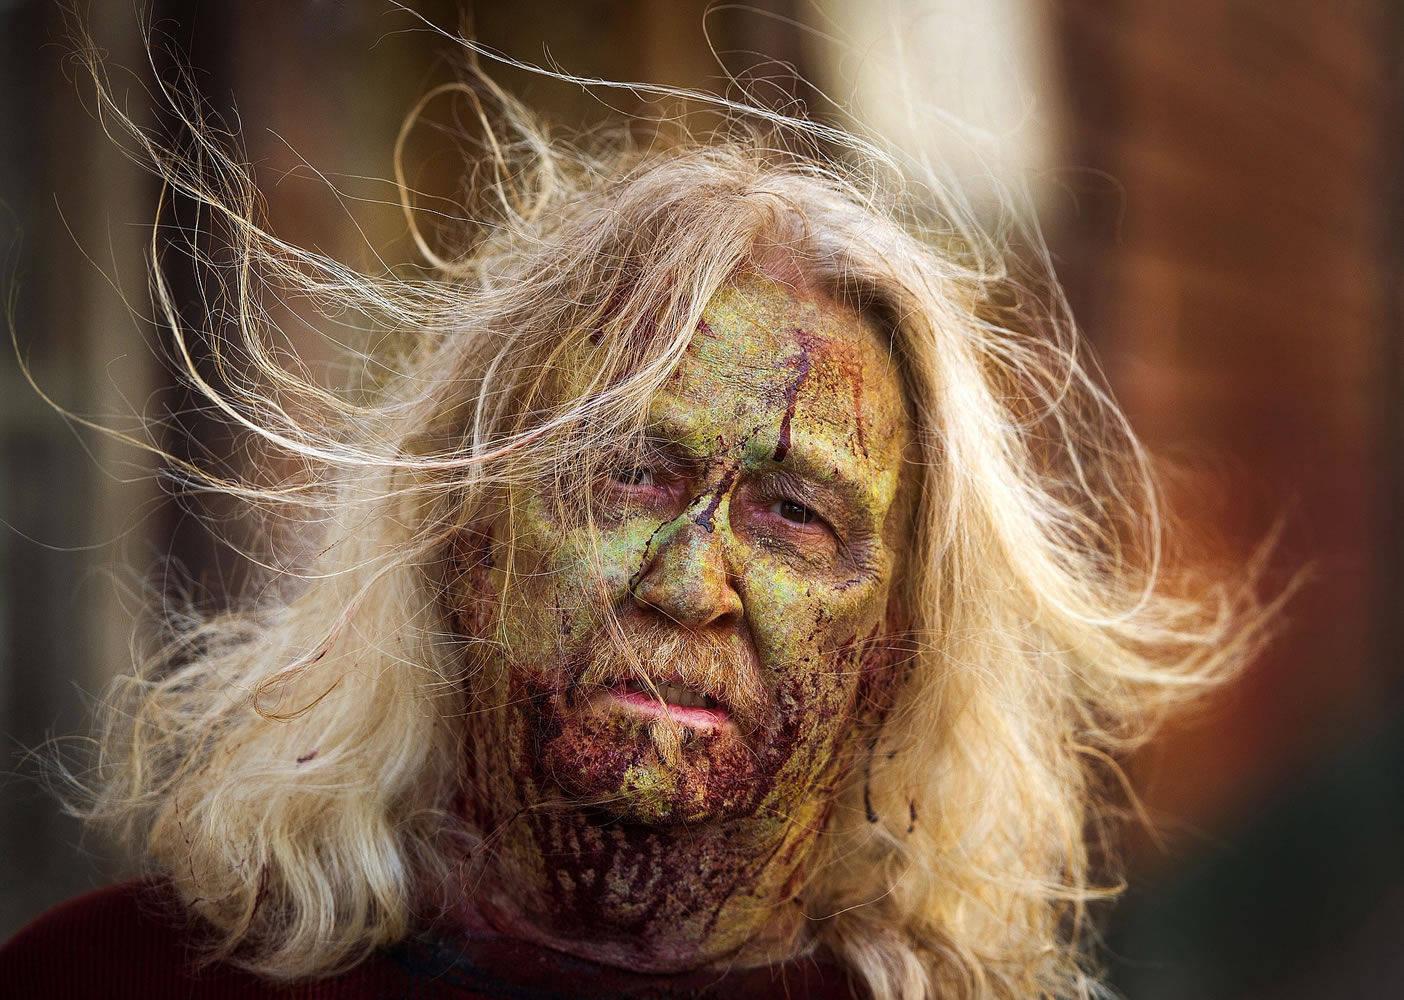 The work of special effects makeup artists with Los Angeles based Synapse FX, who spent hours transforming Phil Humphrey of Spokane into a &quot;Z Nation&quot; zombie extra in Spokane.